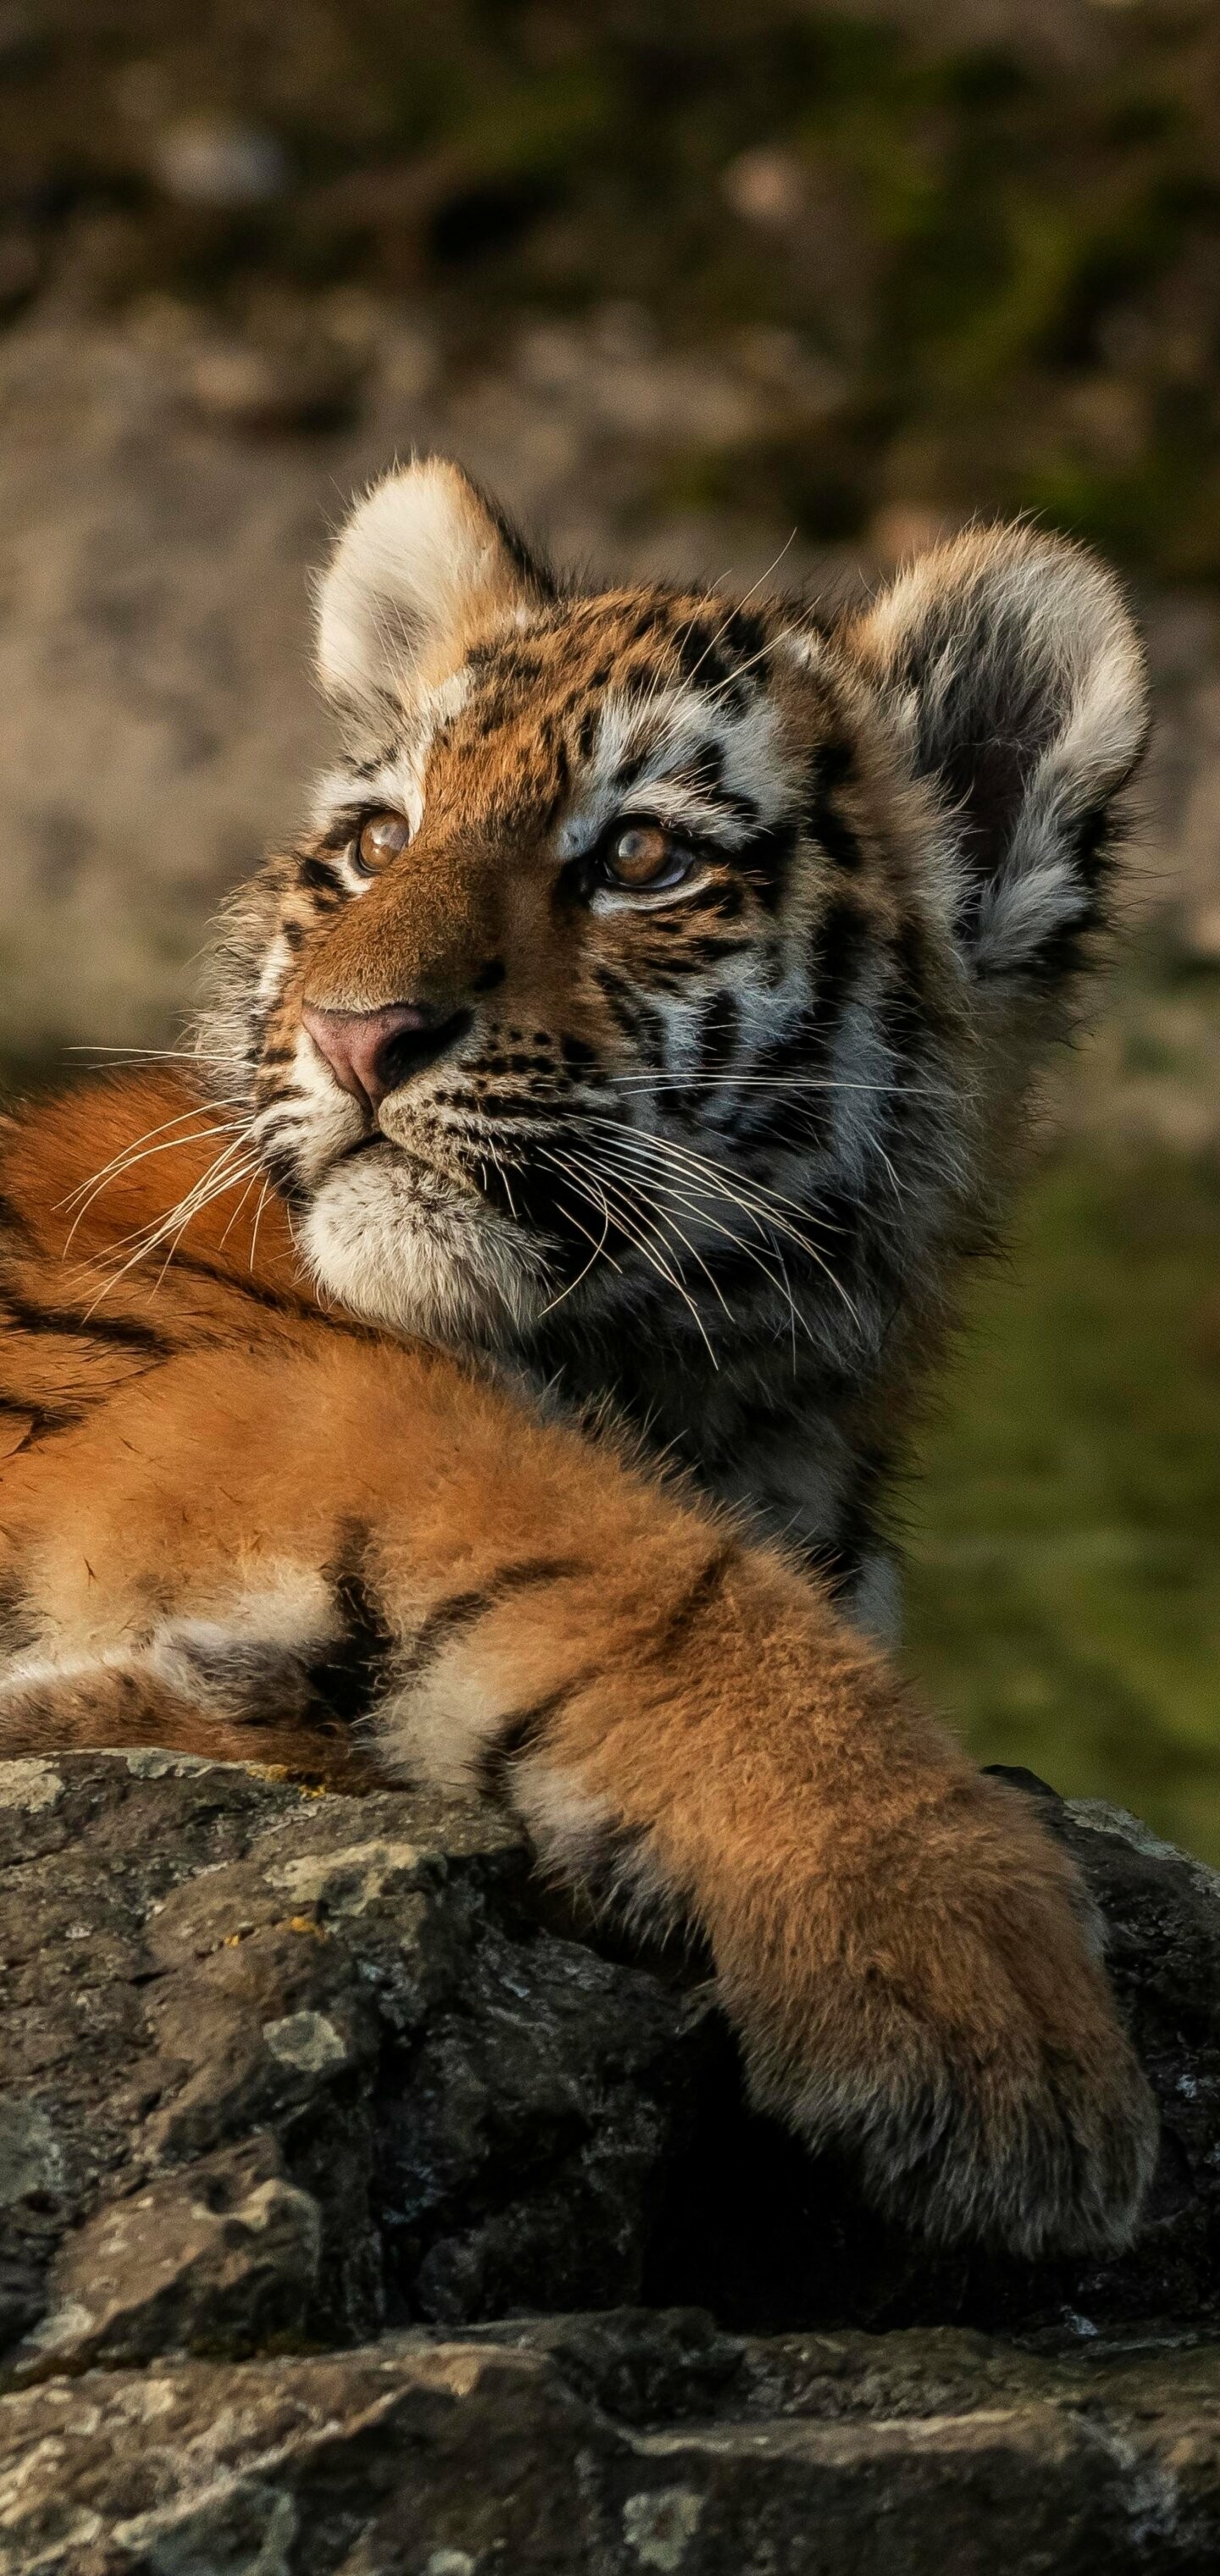 Tiger Cub: The animal is among the most recognizable and popular of the world's charismatic megafauna. 1440x3040 HD Background.